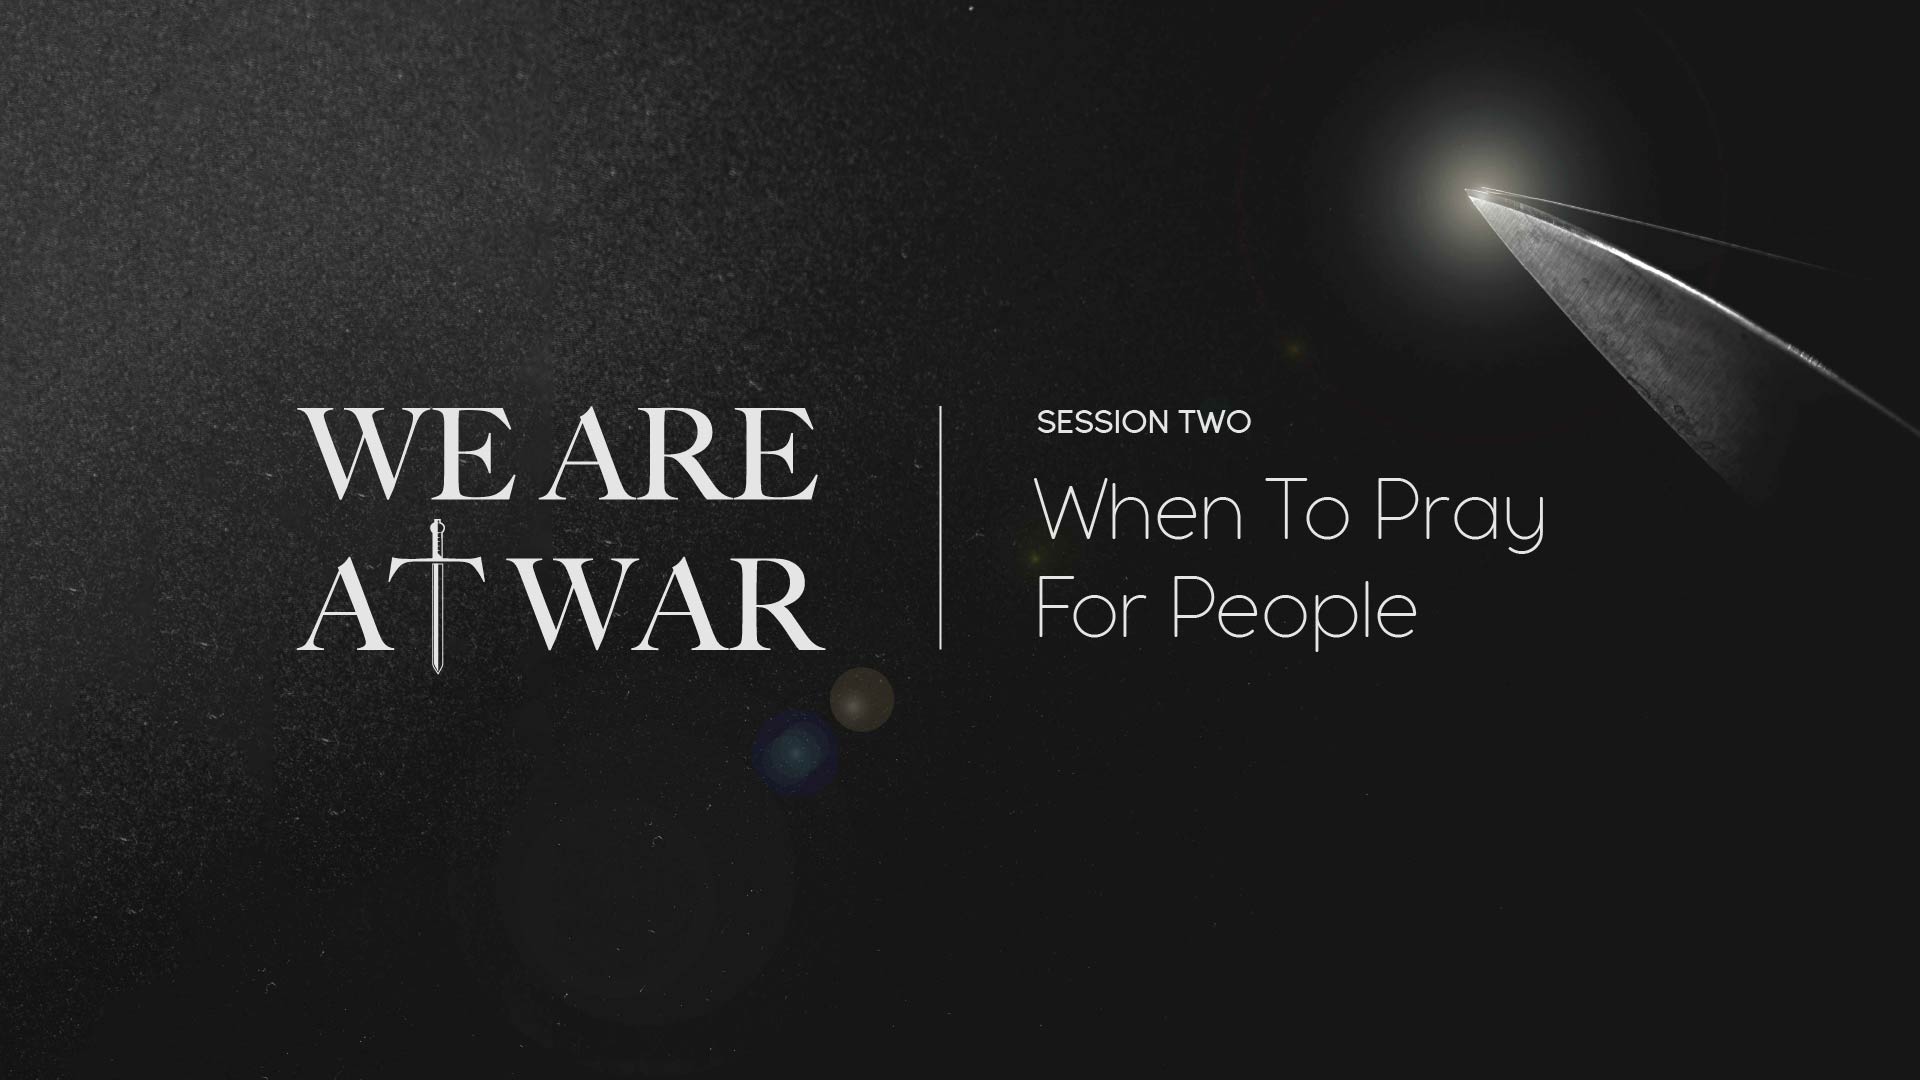 Video image for 'When to Pray for People’ about finding the right time for deliverance